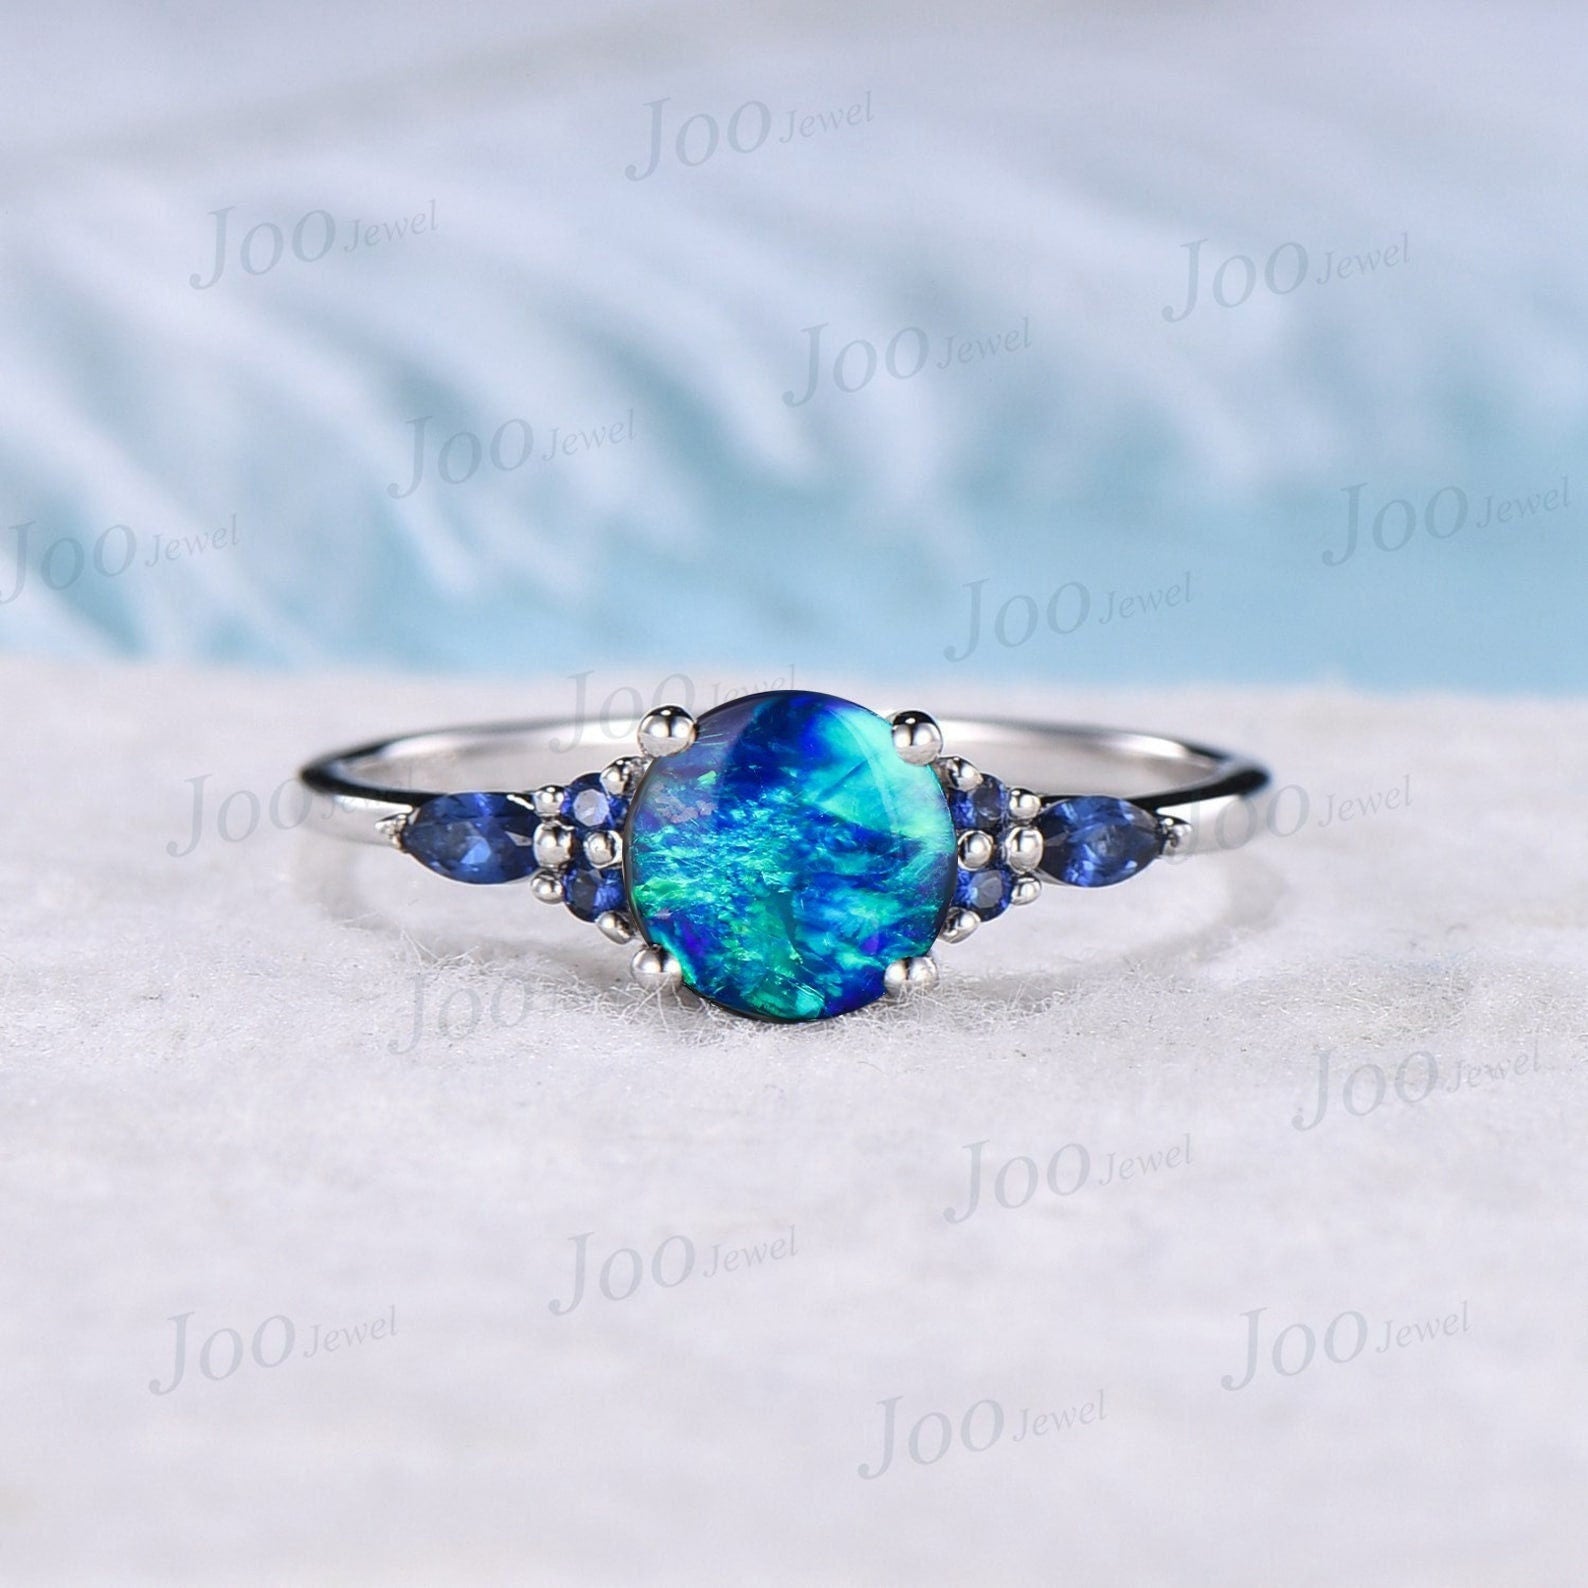 7mm Round Galaxy Blue Opal Engagement Ring Sterling Silver Cluster Blue Sapphire Ring Unique Anniversary Gift Blue Fire Opal Promise Rings